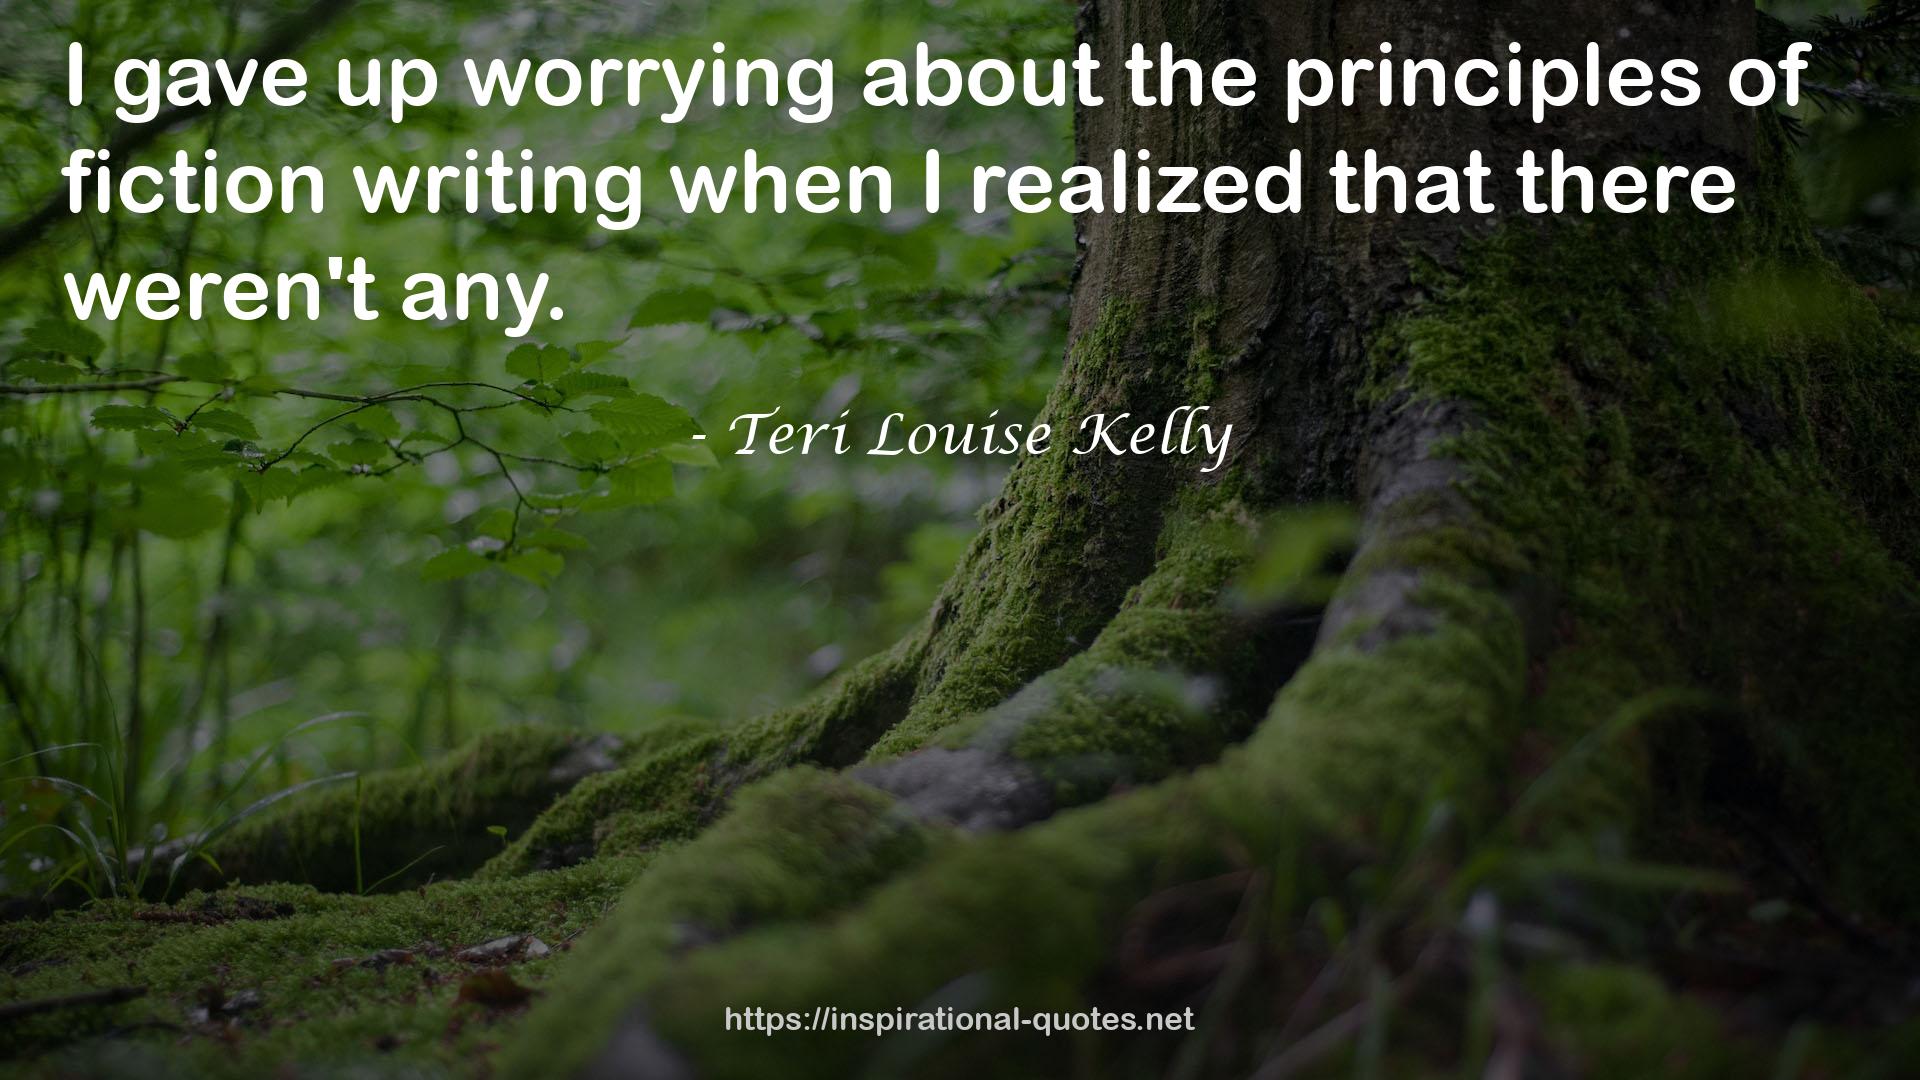 Teri Louise Kelly QUOTES